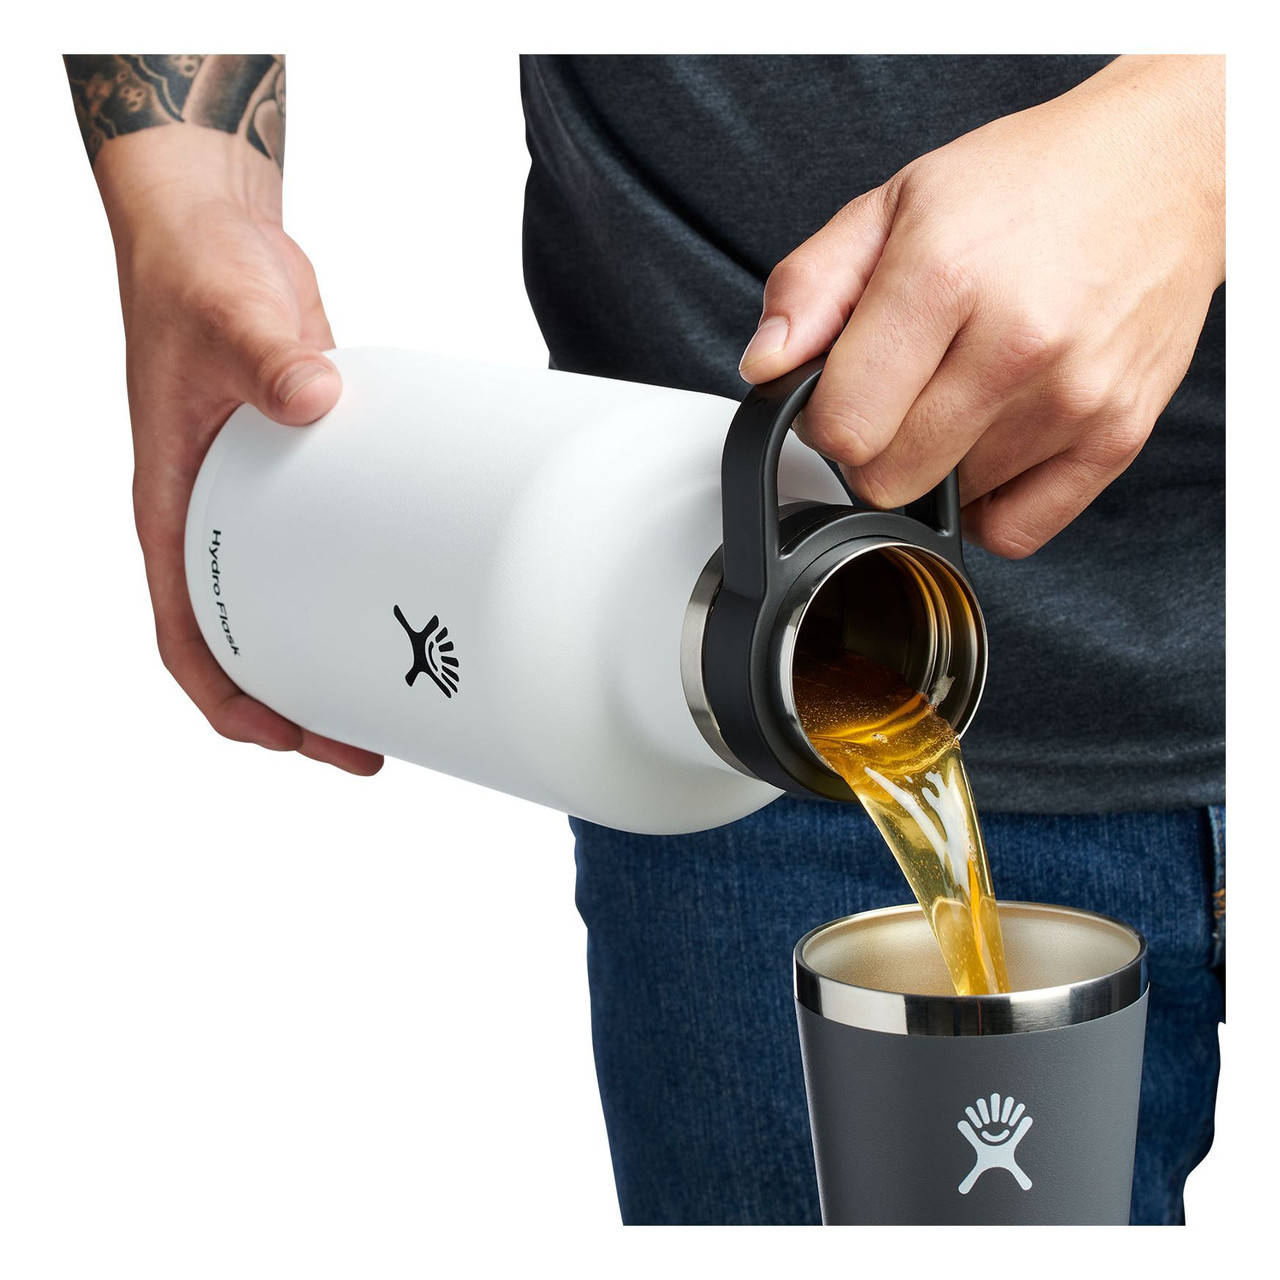 https://cdn11.bigcommerce.com/s-98f3d/images/stencil/1280x1280/products/1448/30670/Hydro_Flask_Insulated_Beer_Growler_64oz_White-pouring__86373.1694649879.jpg?c=2